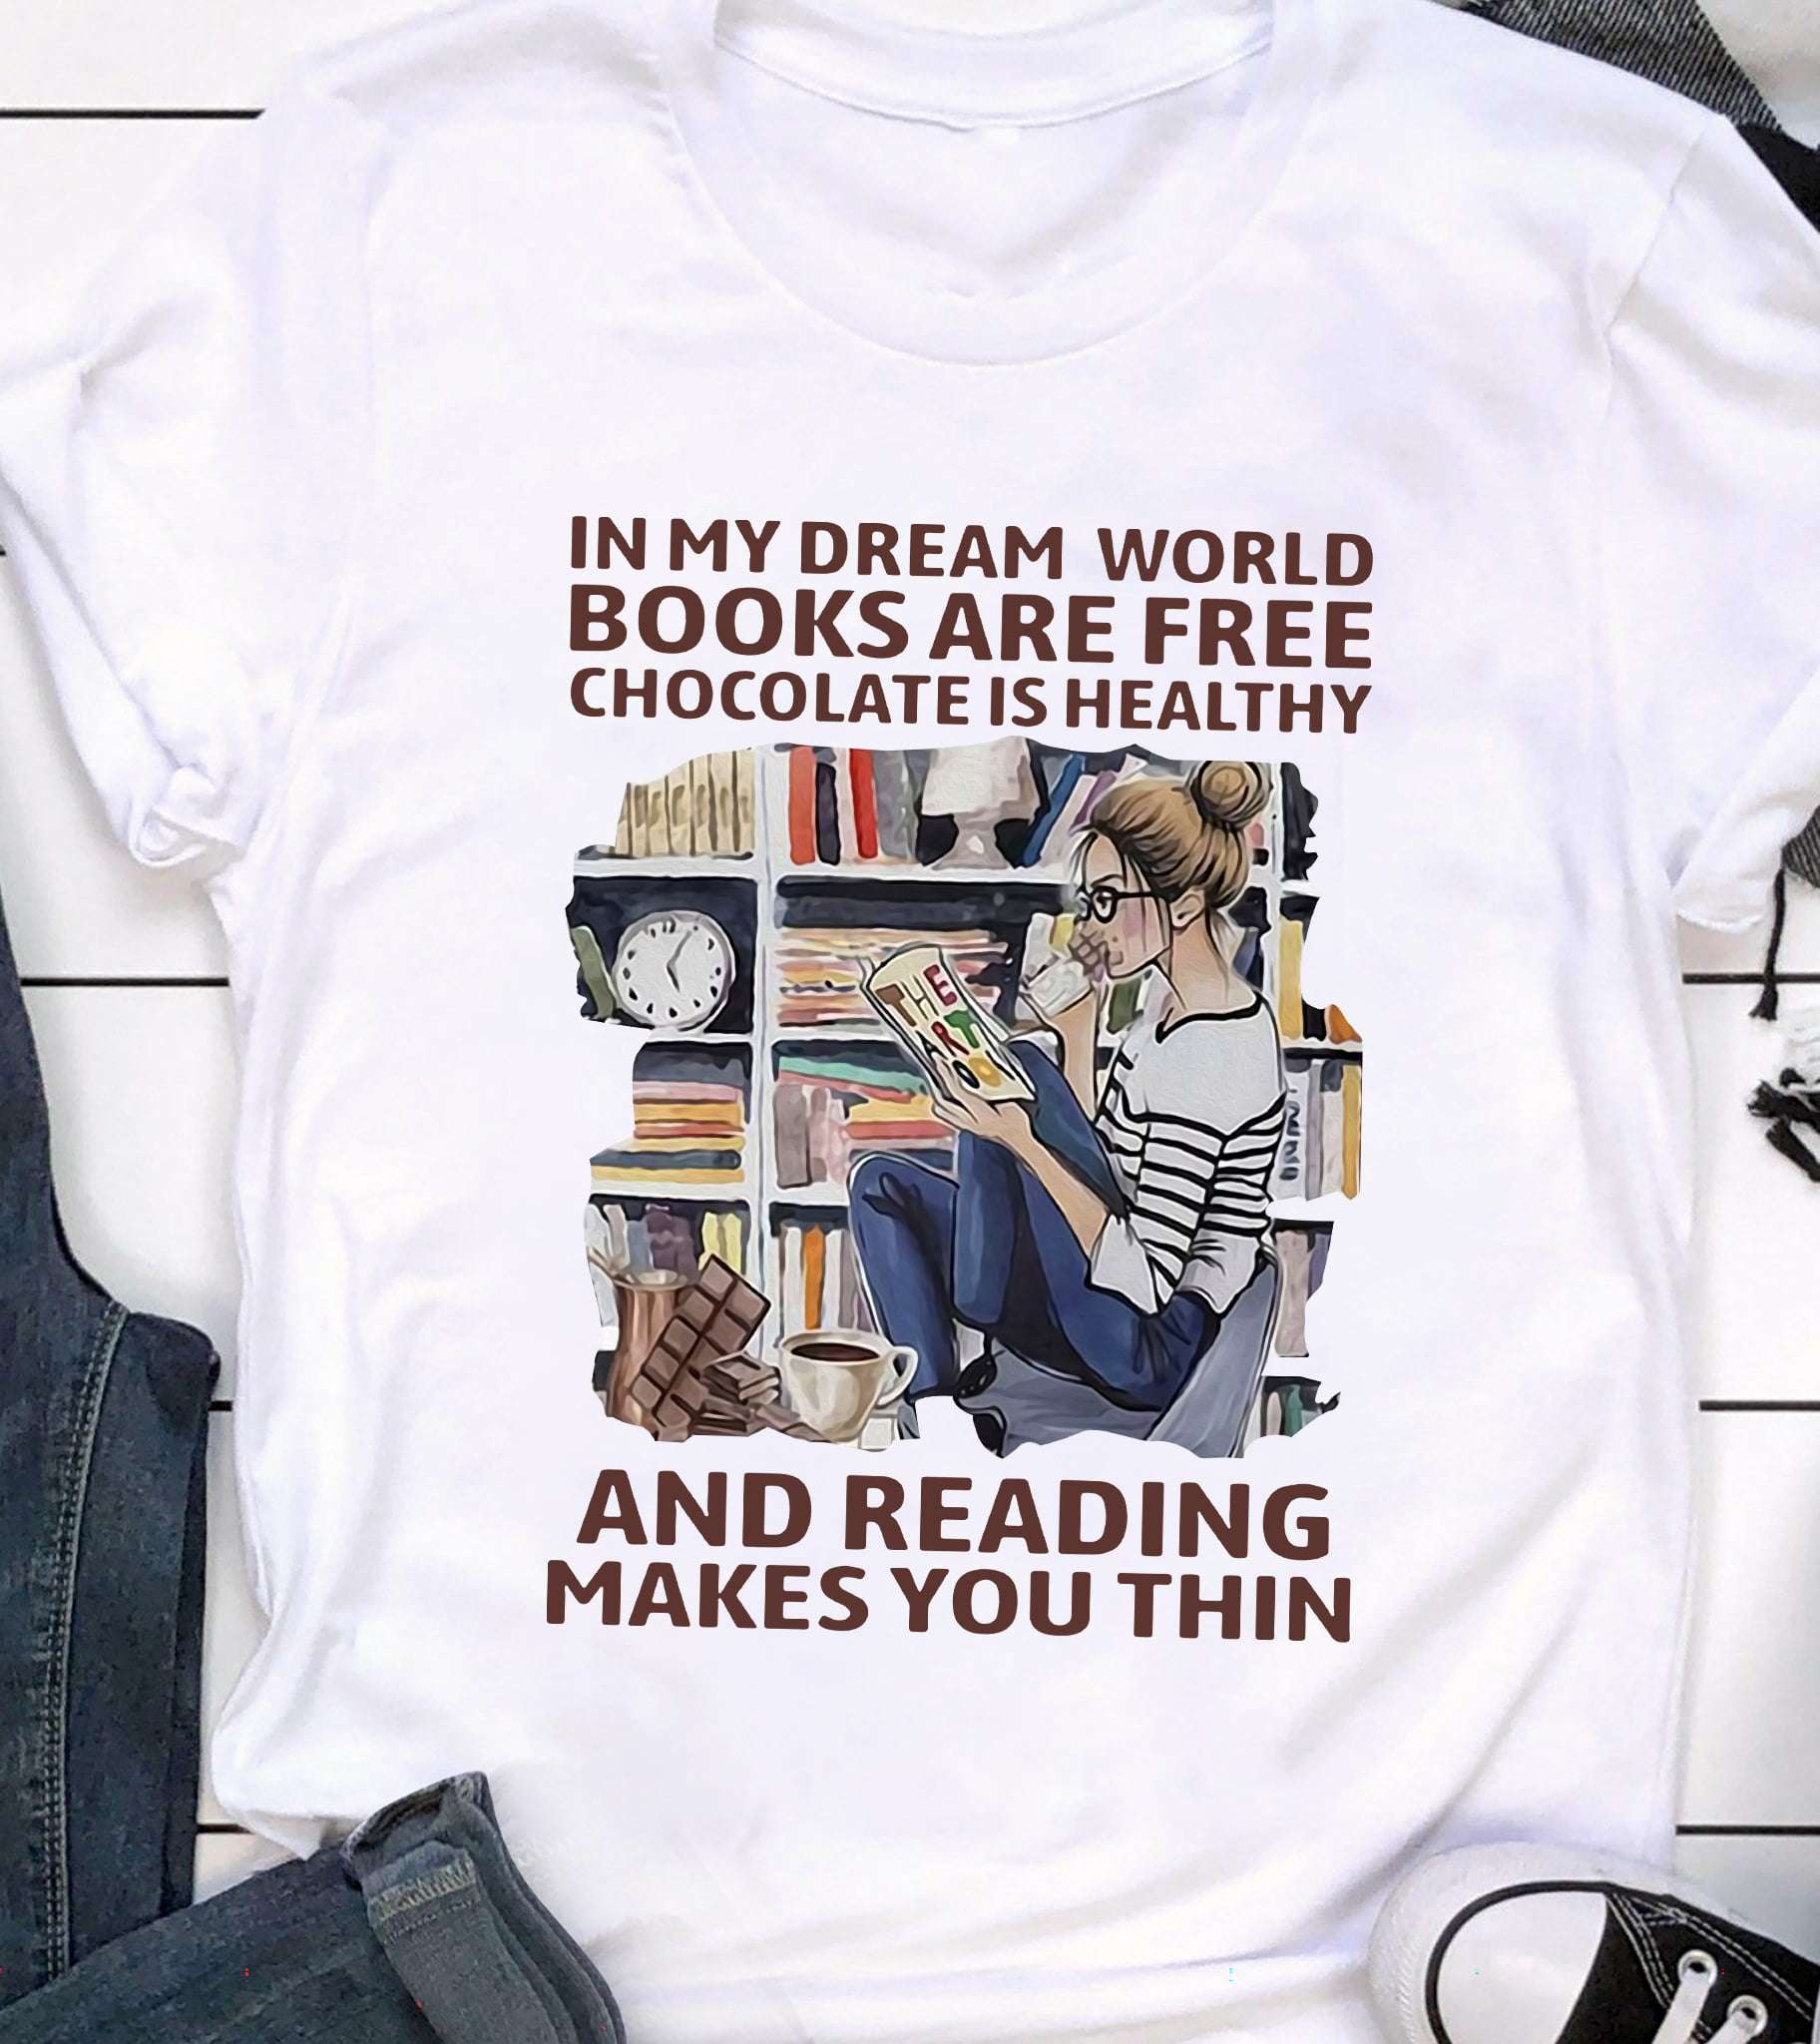 In my dream world books are free, chocolate is healthy and reading makes you thin - Eating chocolate and reading book